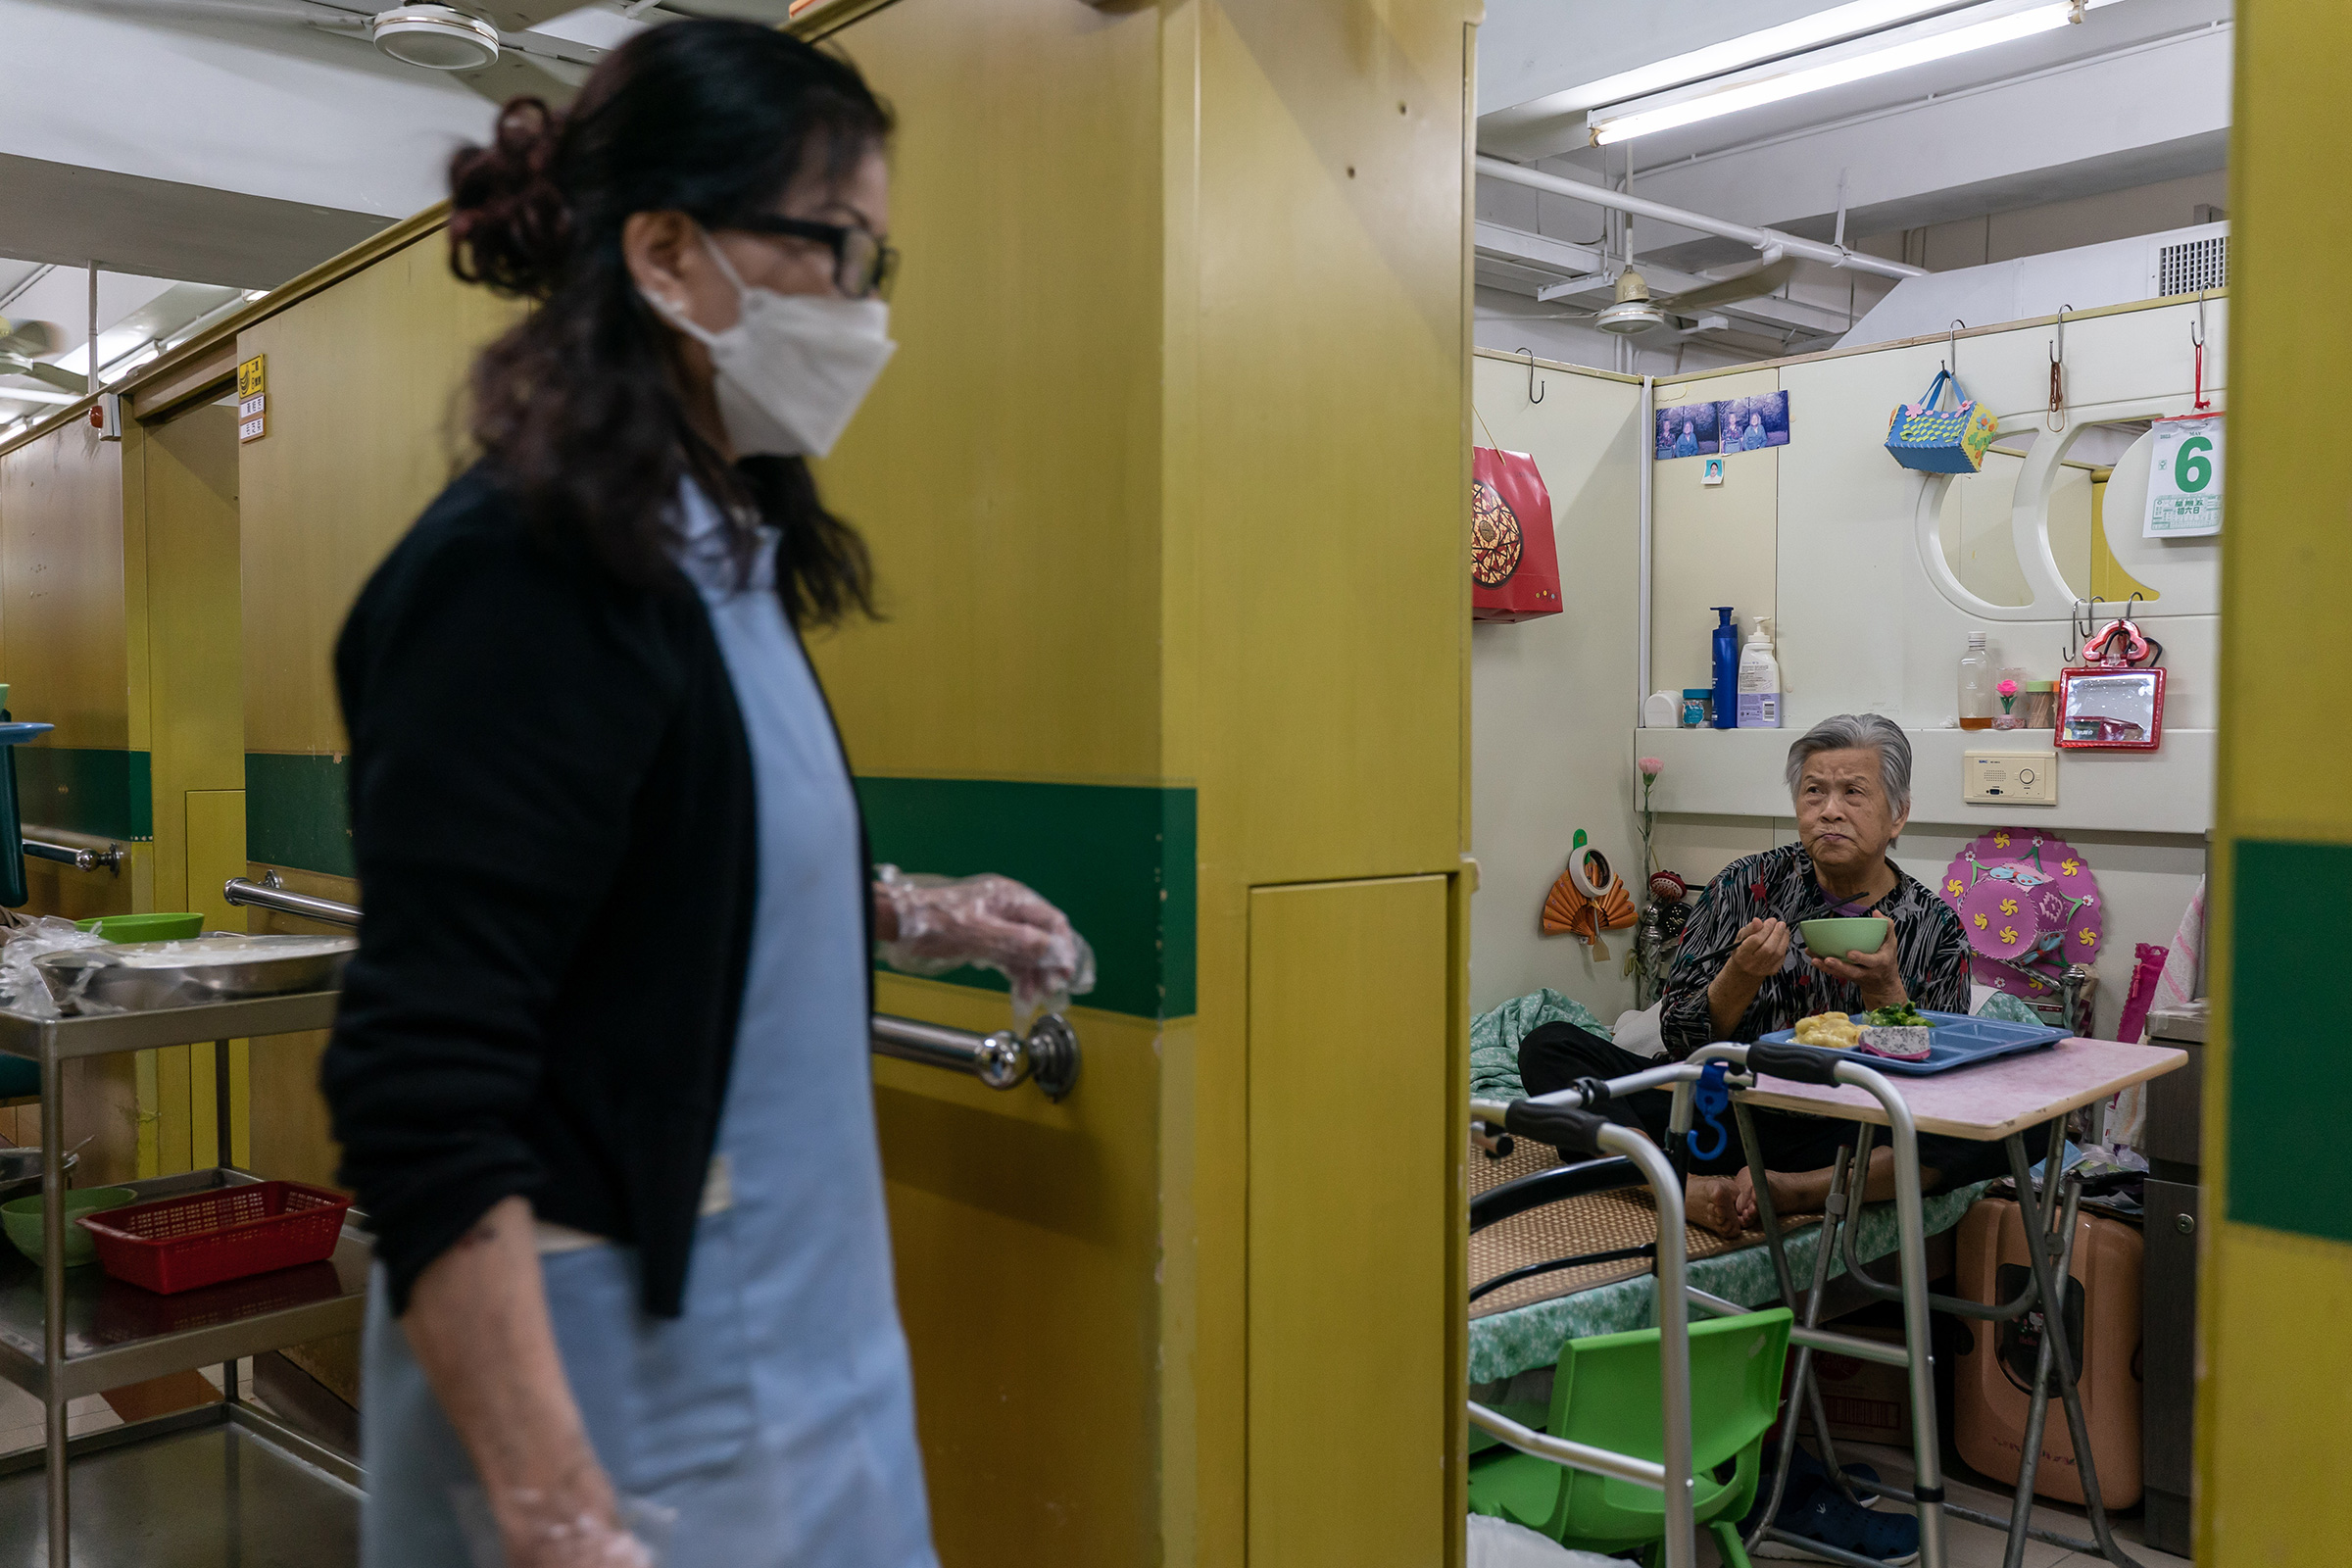 Yip Fung-cheung, 82, a resident of Hong Kong's Kei Tak (Tai Hang) Home for the Aged, eats dinner in her dormitory space. (Anthony Kwan for TIME)